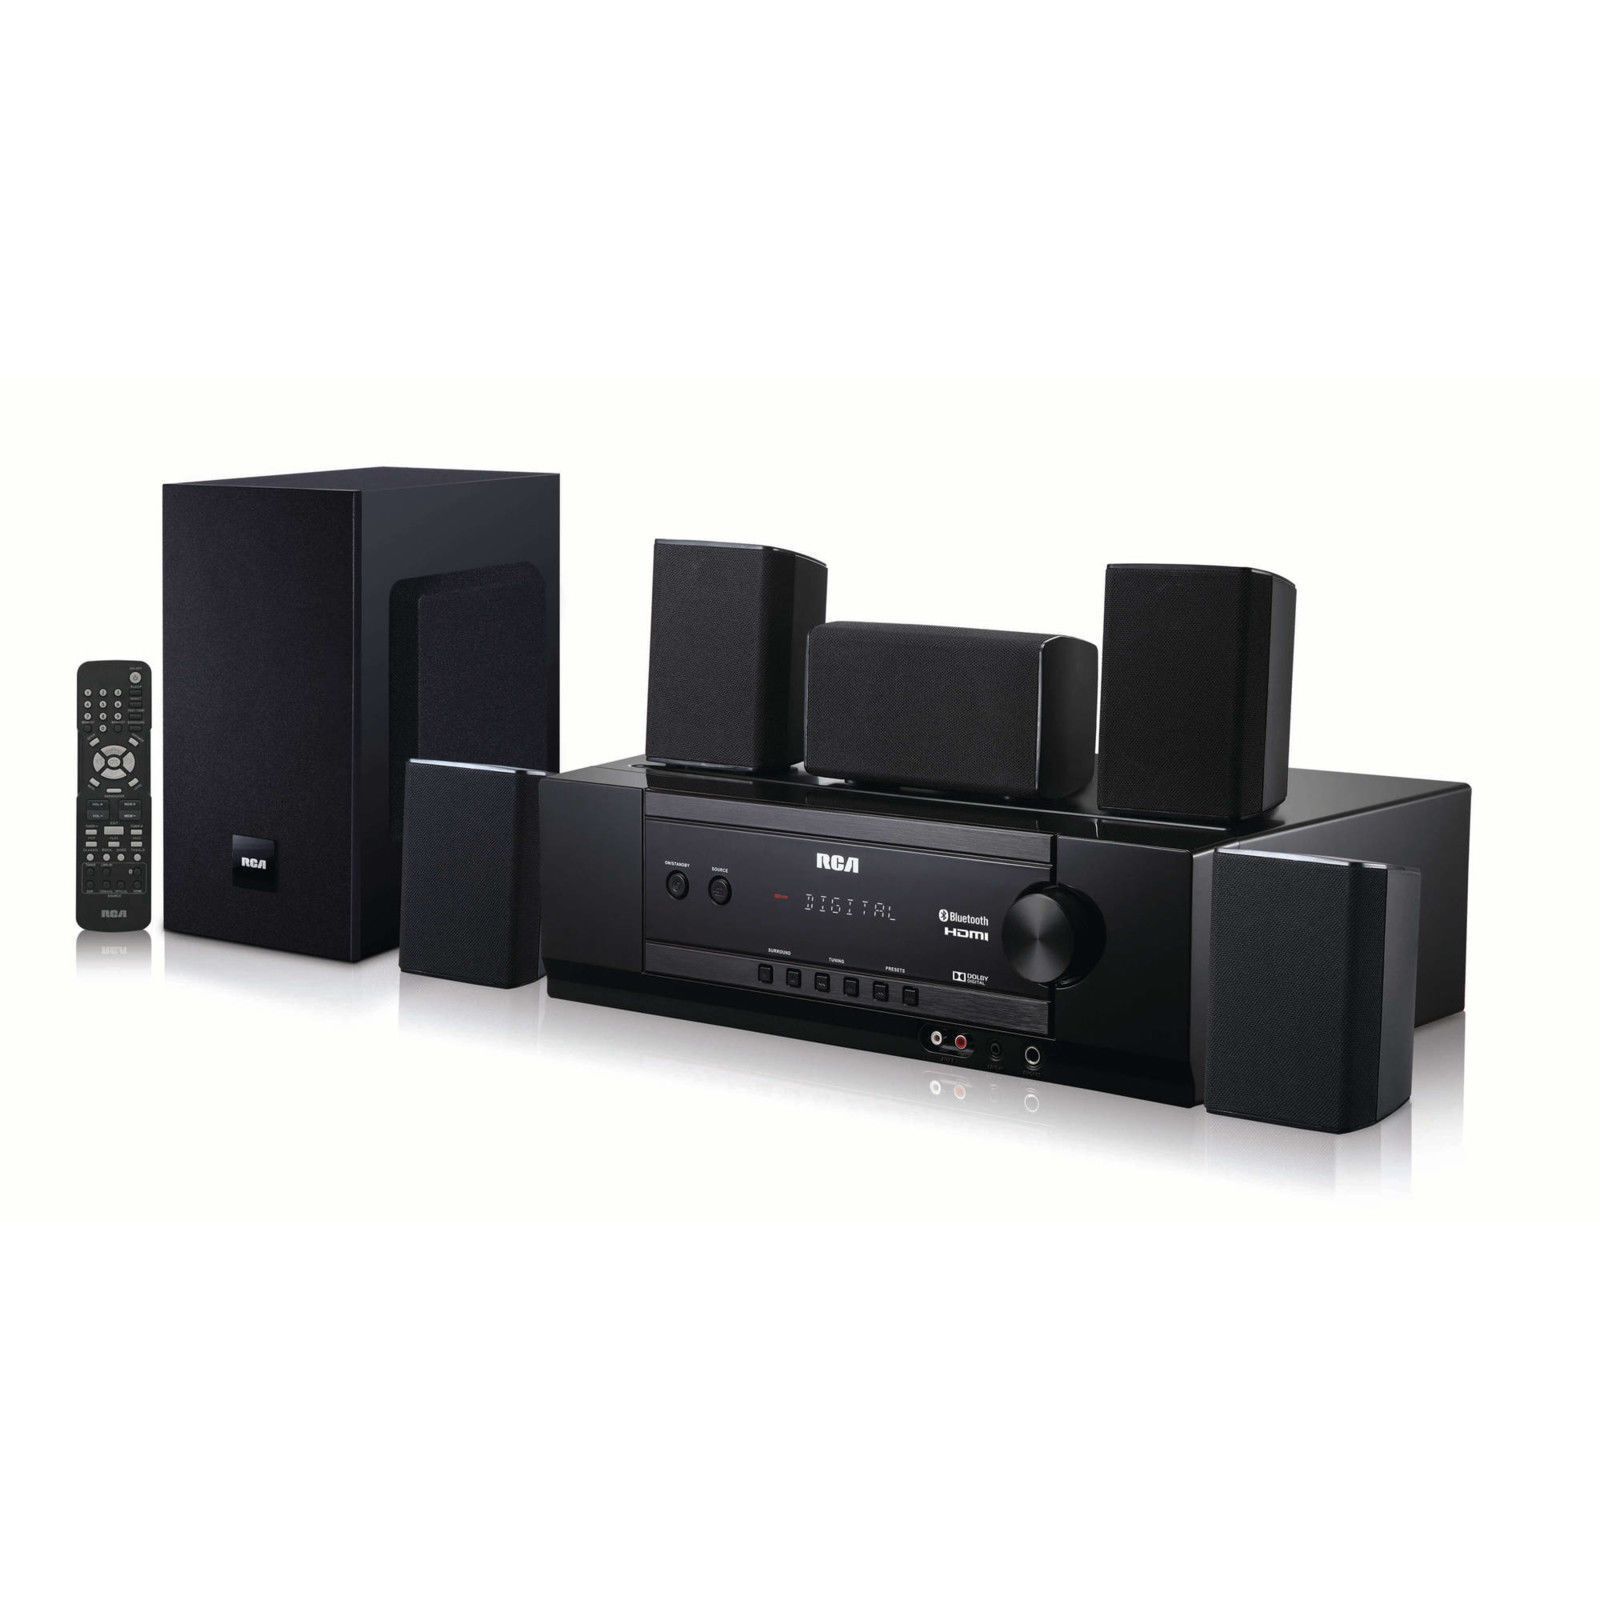 1000W Bluetooth Home Theater System Surround Sound Speakers Dolby Digital 5.1